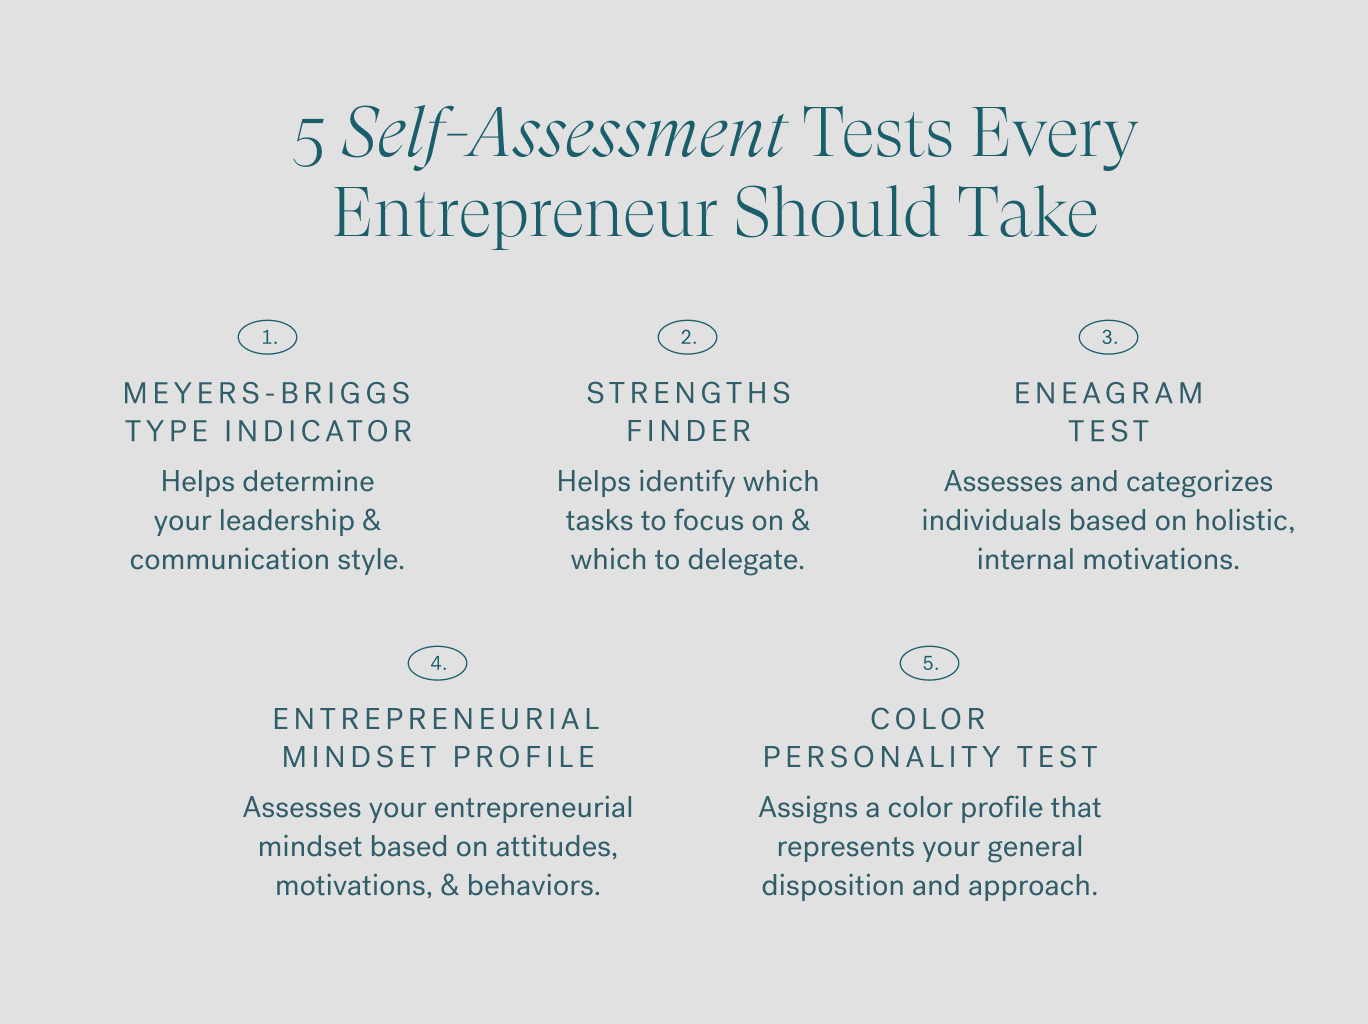 a list of 5 self-assessment tests every entrepreneur should take